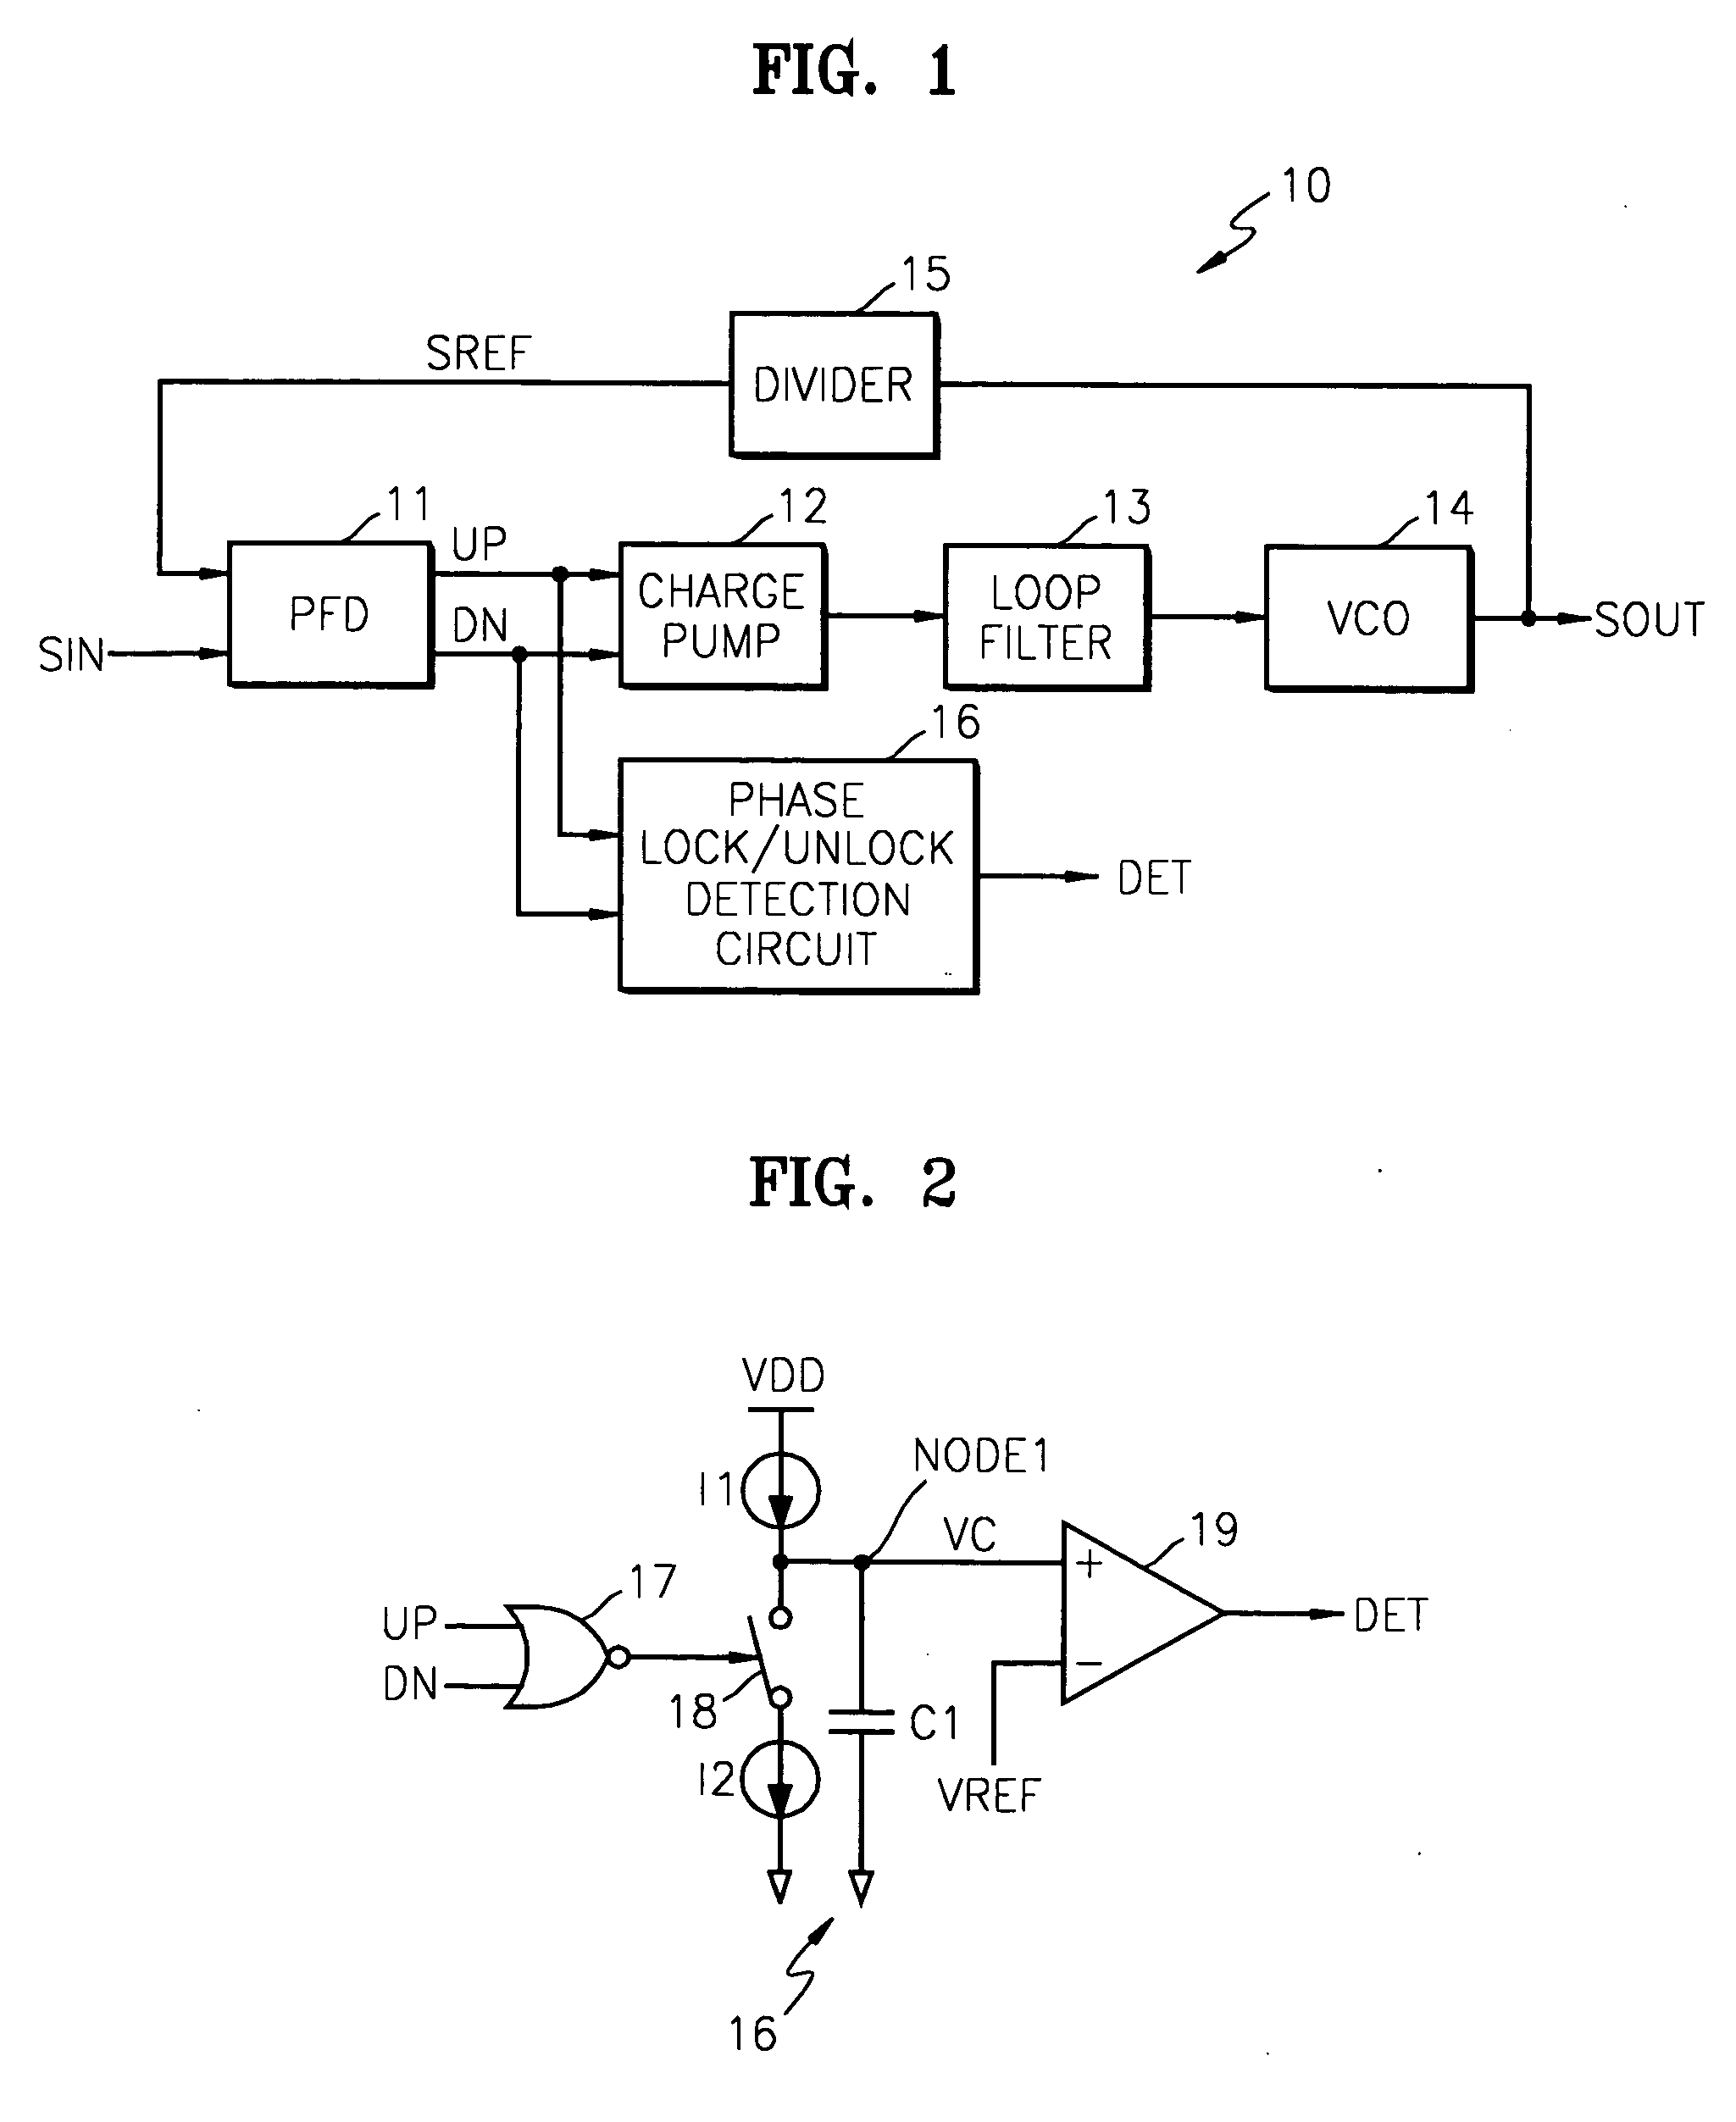 Phase locked loop with improved phase lock/unlock detection function